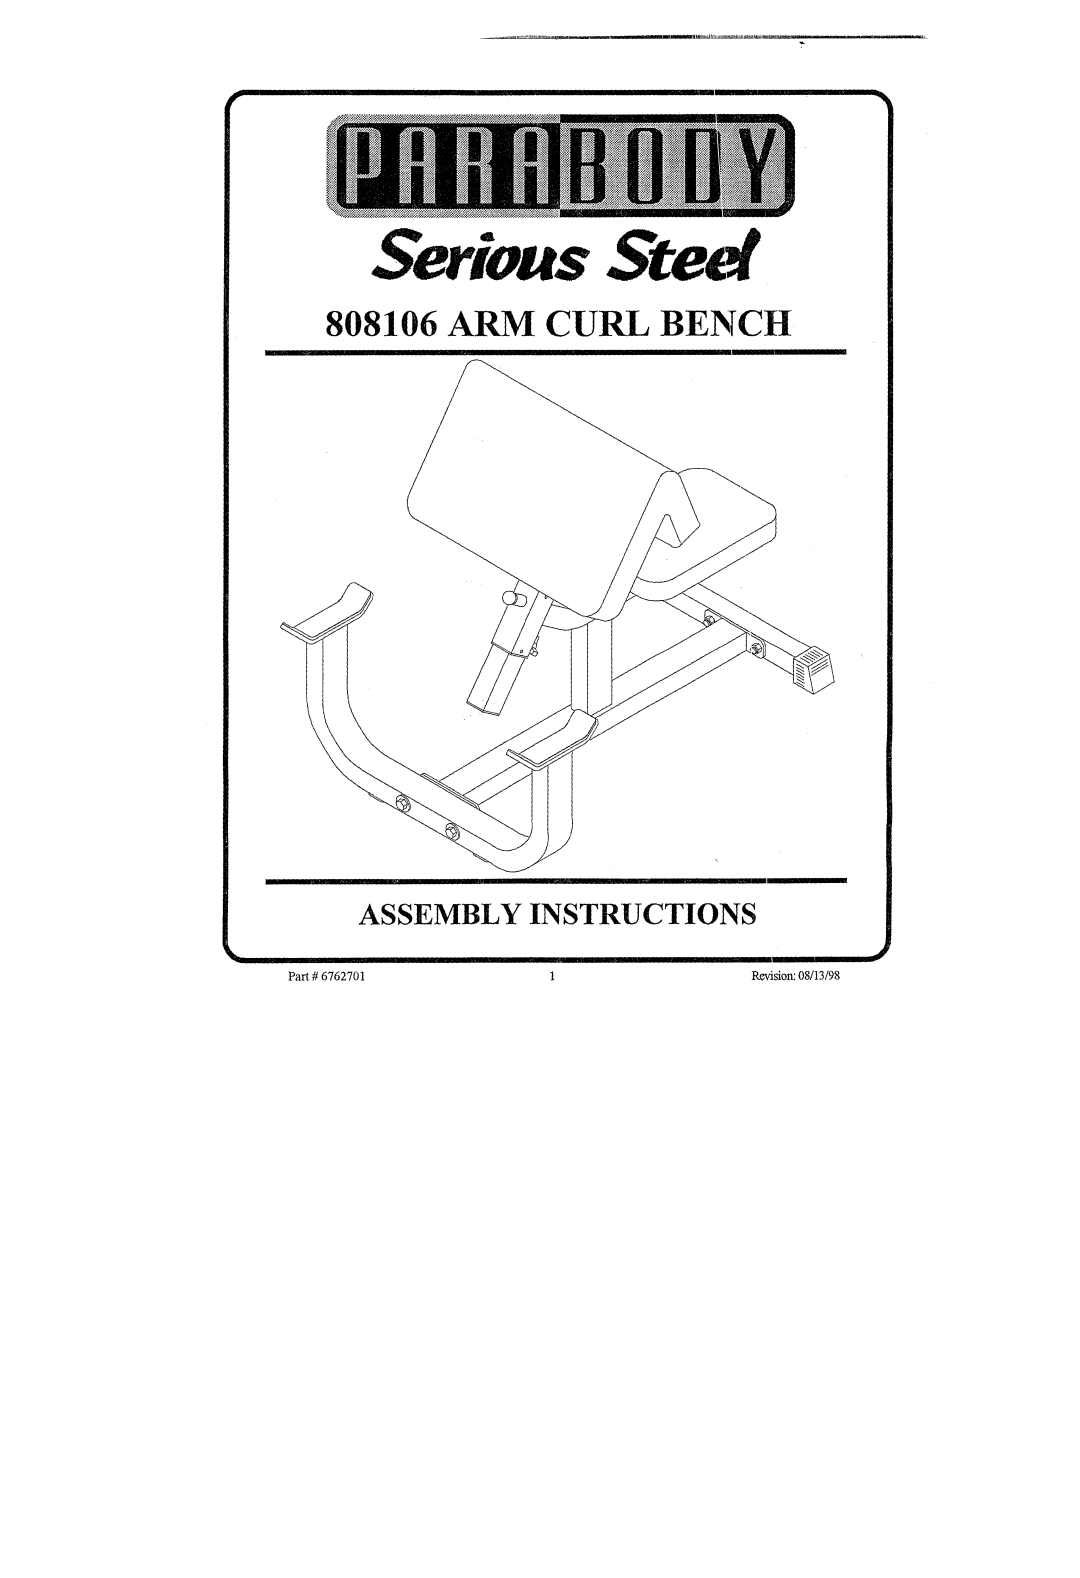 ParaBody 808106 manual Serious, Arm Curl Bench, Assembly Instructions 